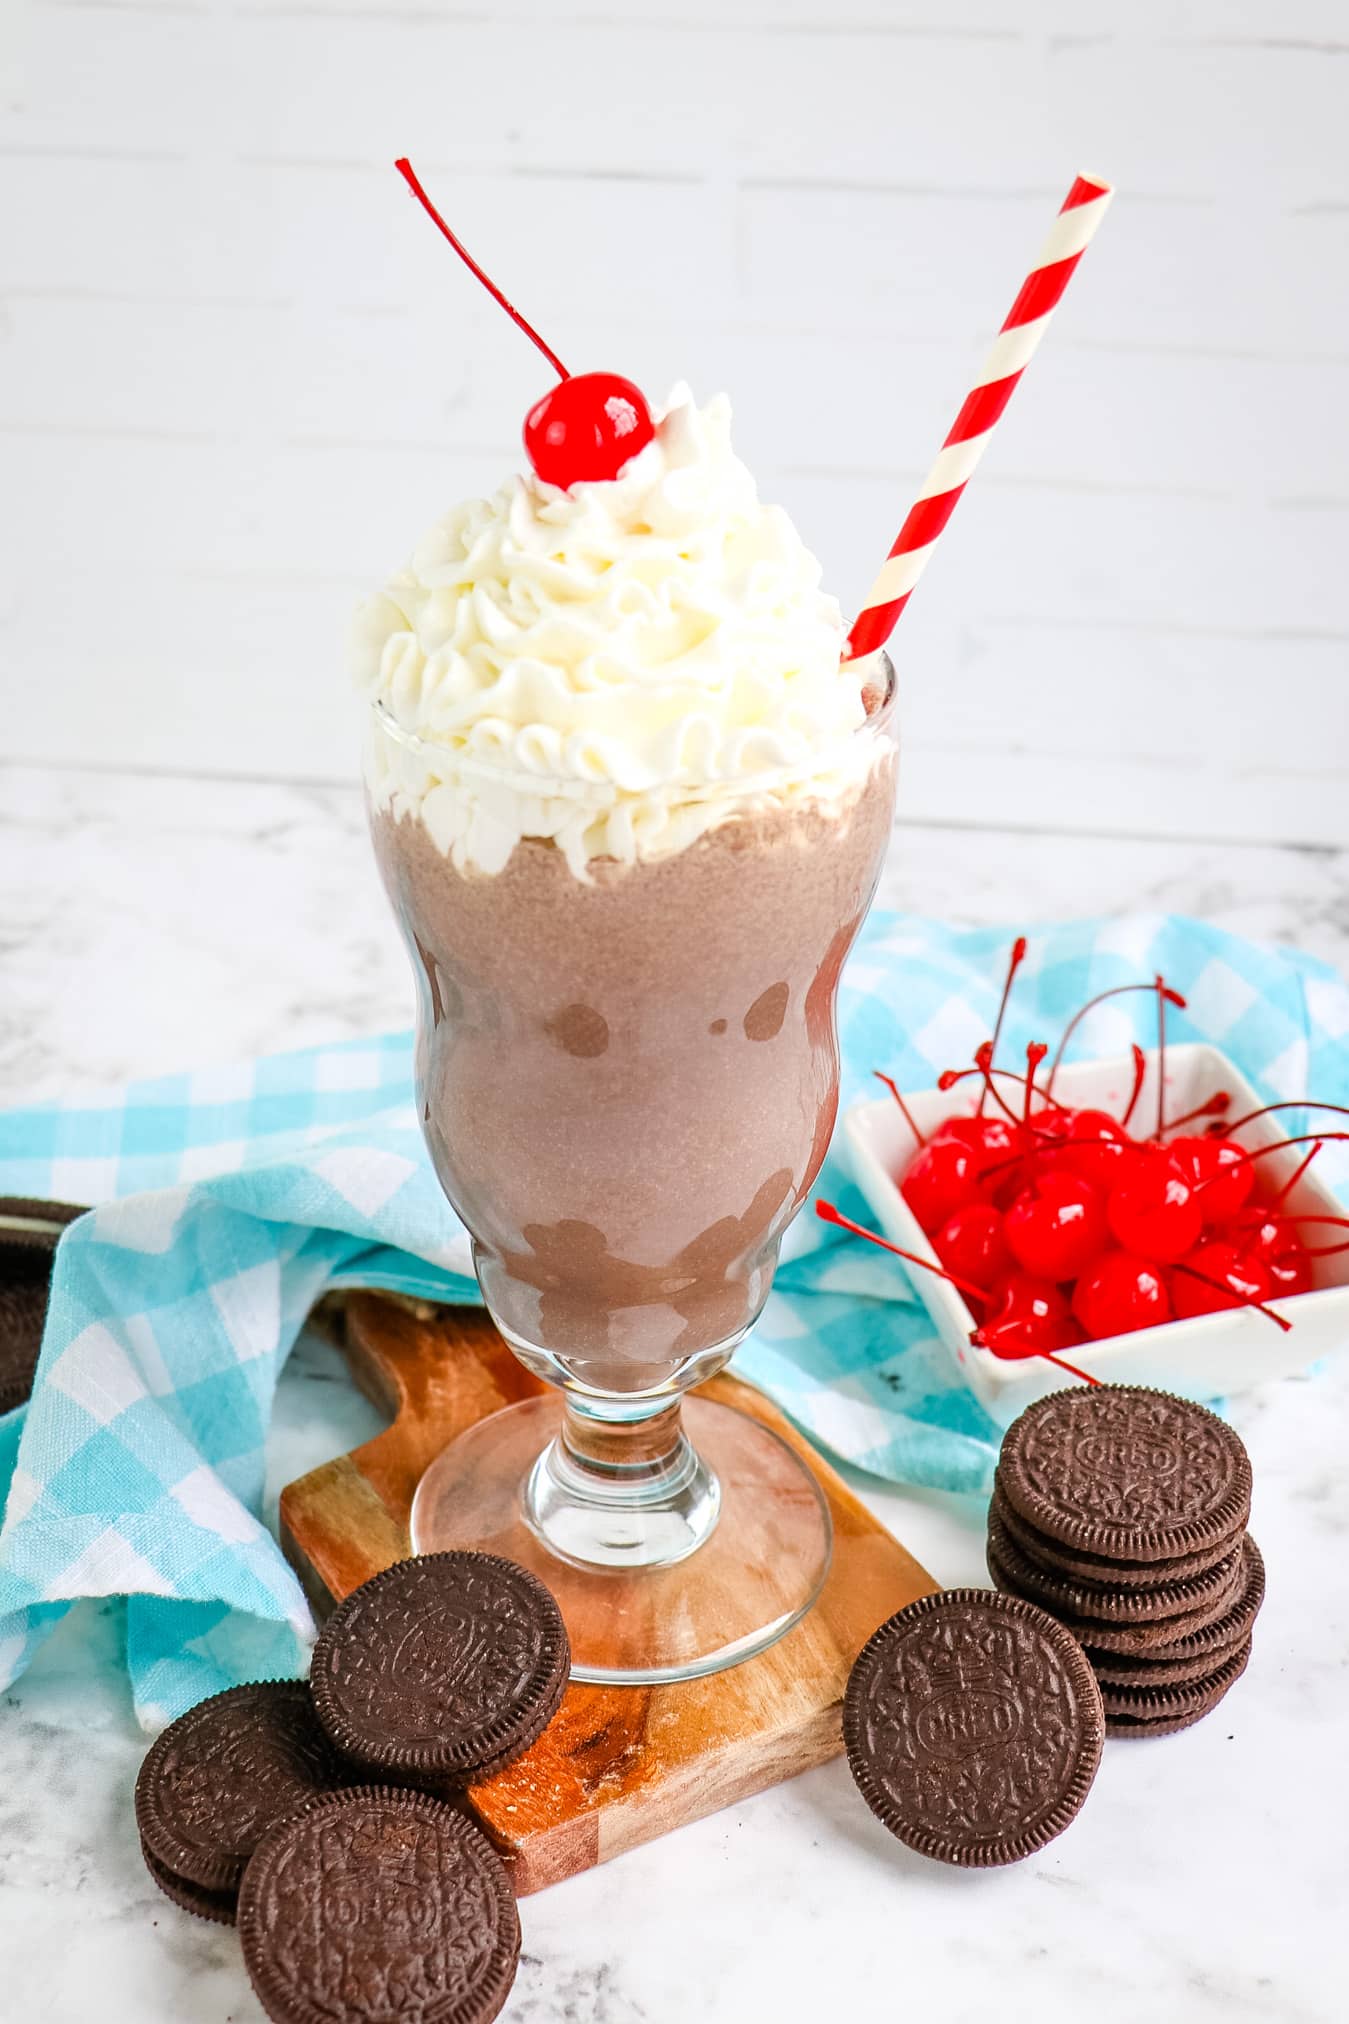 Chick fil a OREO milkshake in glass with OREO cookies and maraschino cherries on the side.